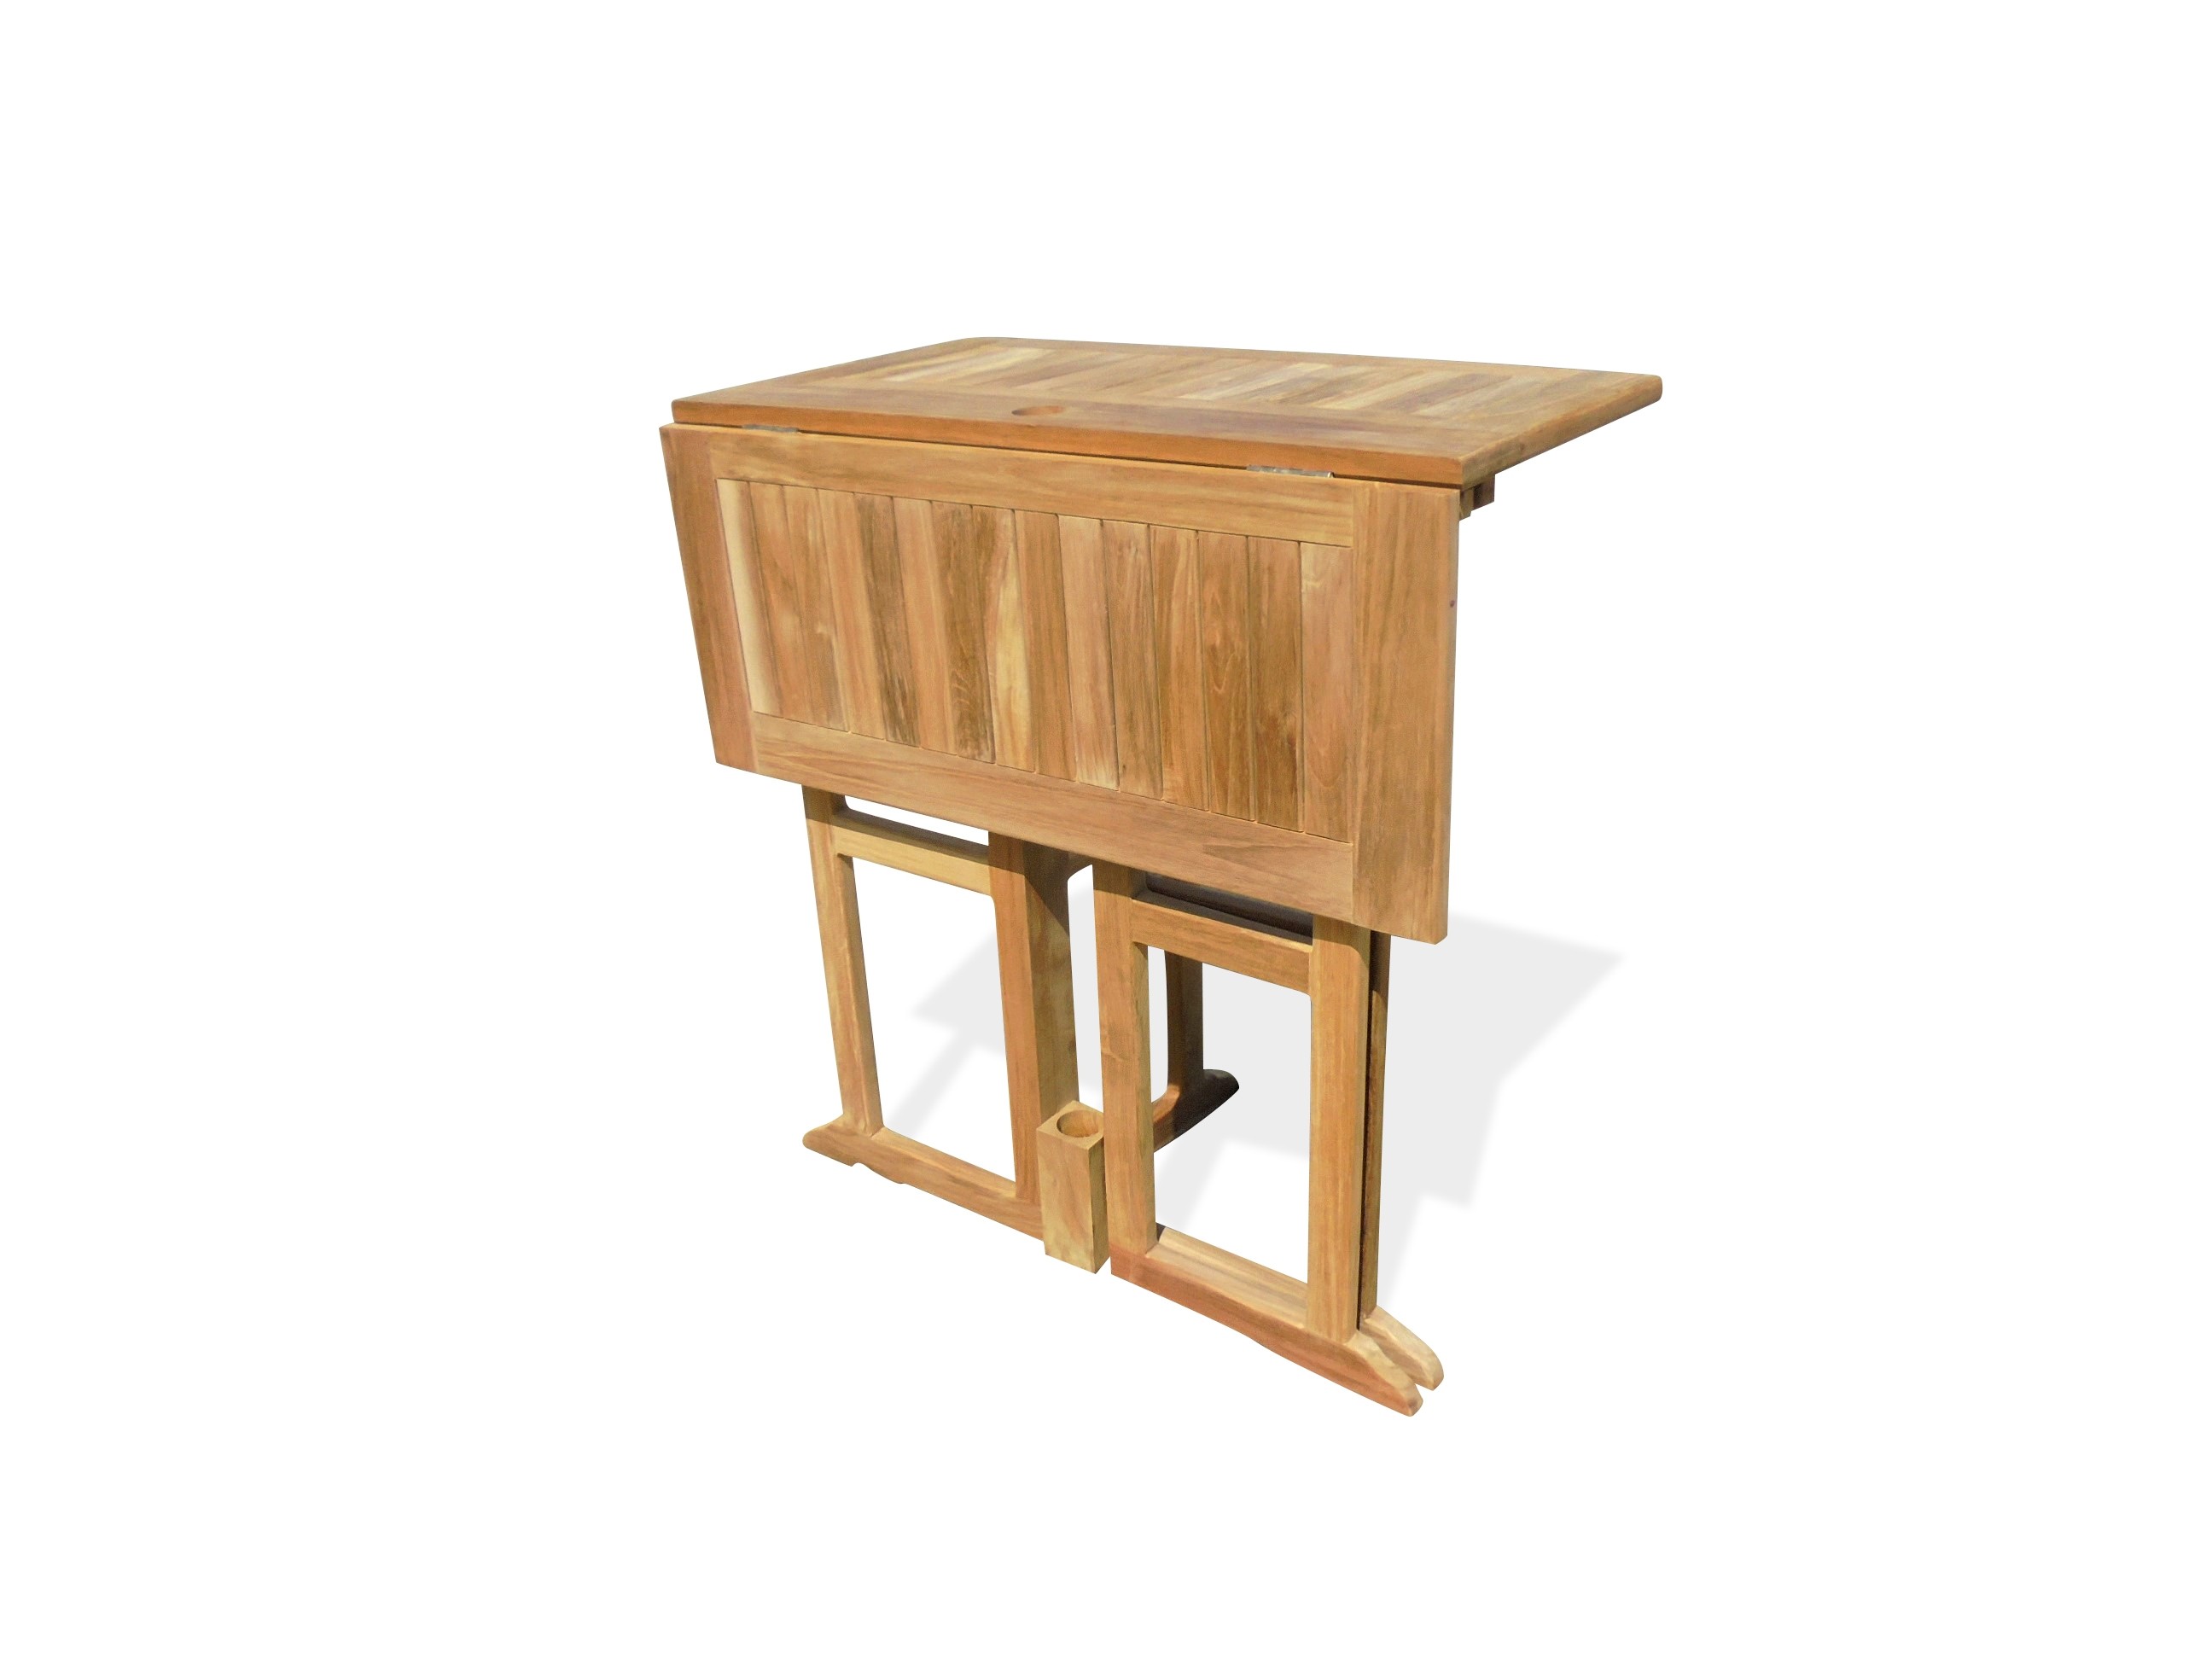 Nassau 35" Square Drop Leaf Folding Bar Table ...use with 1 Leaf Up or 2.... Makes 2 different tables!